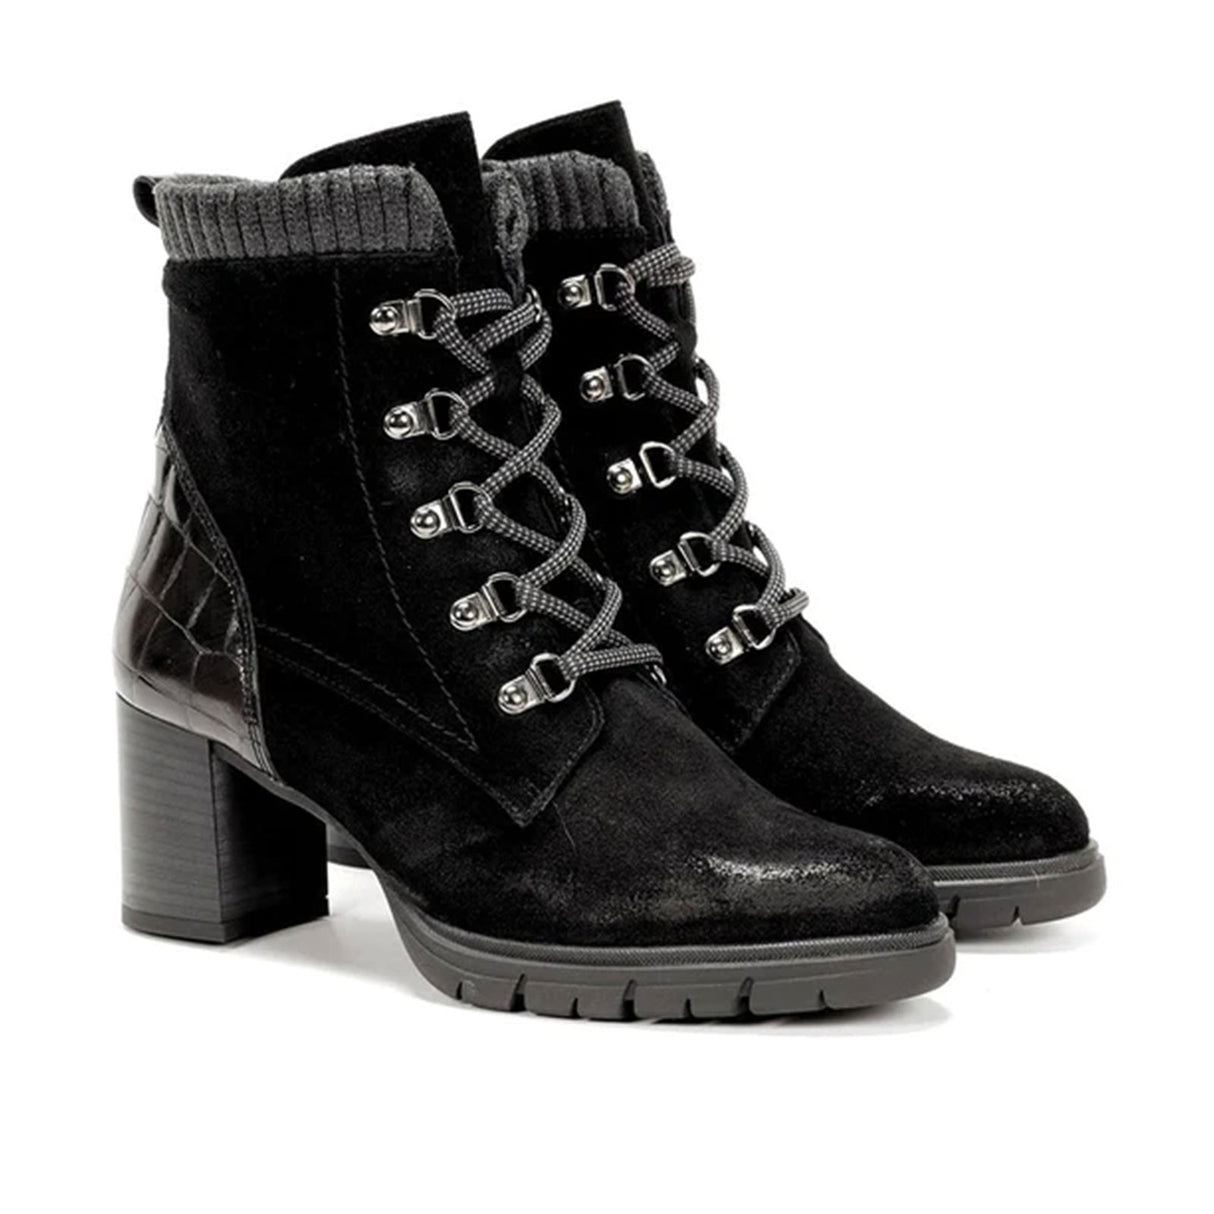 Dorking Camil D8847 Ankle Boot (Women) - Black Boots - Fashion - Ankle Boot - The Heel Shoe Fitters